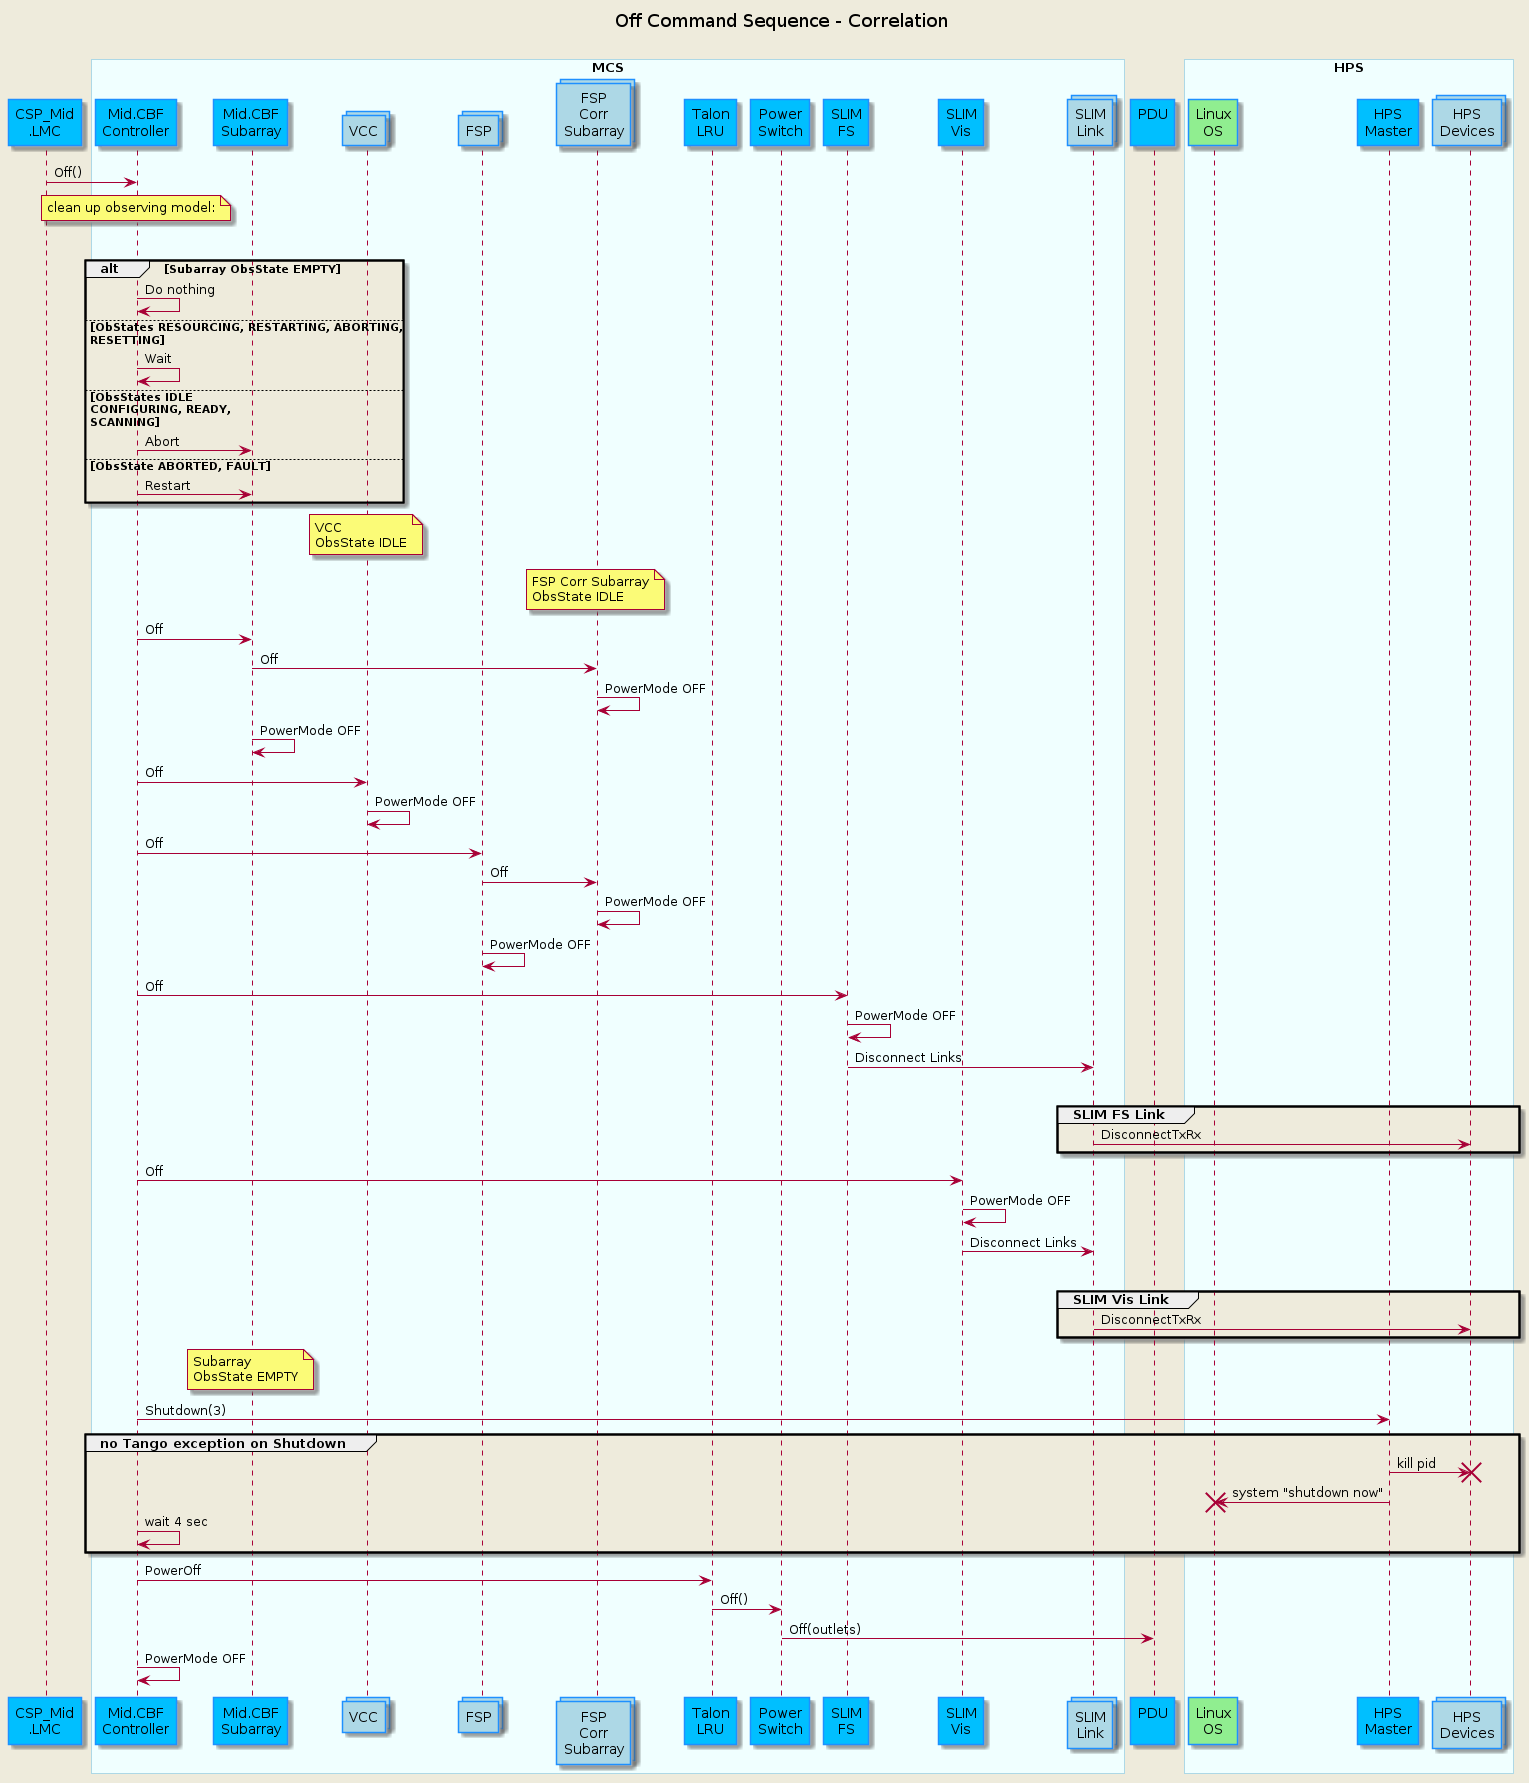 @startuml
'https://plantuml.com/sequence-diagram
skinparam backgroundColor #EEEBDC
skinparam sequence {
ParticipantBorderColor DodgerBlue
ParticipantBackgroundColor DeepSkyBlue
ActorBorderColor DarkGreen
ActorBackgroundColor Green
BoxBorderColor LightBlue
BoxBackgroundColor #F0FFFF
}
skinparam collections {
  BackGroundColor LightBlue
  BorderColor DodgerBlue
}
skinparam database {
  BackgroundColor LightGreen
  BorderColor DarkGreen
}
title Off Command Sequence - Correlation\n
participant "CSP_Mid\n.LMC" as lmc
box "MCS"
participant "Mid.CBF\nController" as controller
participant "Mid.CBF\nSubarray" as subarray
collections "VCC" as vcc
collections "FSP" as fsp
collections "FSP\nCorr\nSubarray" as fspsubarray
participant "Talon\nLRU" as lru
participant "Power\nSwitch" as switch
participant "SLIM\nFS" as slim_fs
participant "SLIM\nVis" as slim_vis
collections "SLIM\nLink" as slimlink
end box
participant "PDU\n" as pdu
box "HPS"
participant "Linux\nOS" as os #LightGreen
participant "HPS\nMaster" as hpsmaster
collections "HPS\nDevices" as hpsdevices
end box
lmc        ->  controller    : Off()

note over controller         : clean up observing model:

loop until Subarray ObsState EMPTY or time exceeded
alt Subarray ObsState EMPTY
controller -> controller : Do nothing
else ObStates RESOURCING, RESTARTING, ABORTING,\nRESETTING
controller -> controller : Wait
else ObsStates IDLE\nCONFIGURING, READY,\nSCANNING
controller -> subarray   : Abort
else ObsState ABORTED, FAULT
controller -> subarray   : Restart
end loop
note over vcc            : VCC\nObsState IDLE
note over fspsubarray    : FSP Corr Subarray\nObsState IDLE

controller ->  subarray      : Off
subarray   ->  fspsubarray   : Off
fspsubarray->  fspsubarray   : PowerMode OFF
subarray   ->  subarray      : PowerMode OFF
controller ->  vcc           : Off
vcc        ->  vcc           : PowerMode OFF
controller ->  fsp           : Off
fsp        ->  fspsubarray   : Off
fspsubarray->  fspsubarray   : PowerMode OFF
fsp        ->  fsp           : PowerMode OFF
controller ->  slim_fs       : Off
slim_fs    ->  slim_fs       : PowerMode OFF
slim_fs    ->  slimlink      : Disconnect Links
loop
group SLIM FS Link
slimlink   ->  hpsdevices    : DisconnectTxRx
end loop
controller ->  slim_vis      : Off
slim_vis   ->  slim_vis      : PowerMode OFF
slim_vis   ->  slimlink      : Disconnect Links
loop
group SLIM Vis Link
slimlink   ->  hpsdevices    : DisconnectTxRx
end loop

note over subarray       : Subarray\nObsState EMPTY
controller ->  hpsmaster     : Shutdown(3)
group no Tango exception on Shutdown
hpsmaster  ->  hpsdevices !! : kill pid
hpsmaster  ->  os !!         : system "shutdown now"
controller ->  controller    : wait 4 sec
end group
controller ->  lru           : PowerOff
lru        ->  switch        : Off()
switch     ->  pdu           : Off(outlets)

controller ->  controller    : PowerMode OFF
@enduml